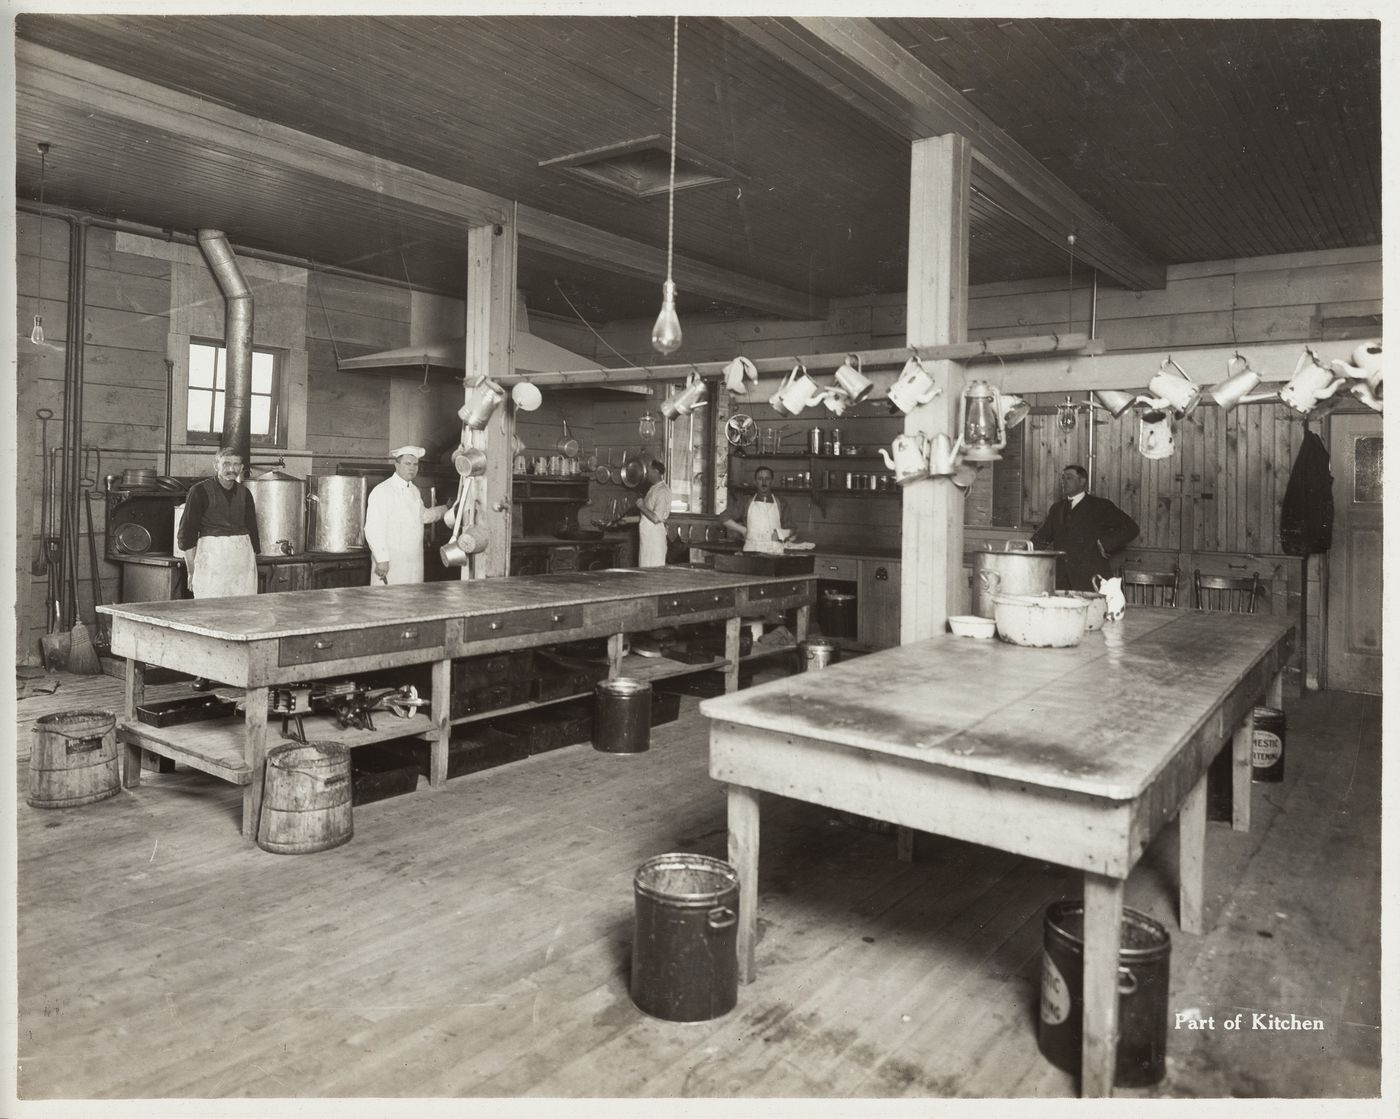 Interior view of kitchen at the Energite Explosives Plant No. 3, the Shell Loading Plant, Renfrew, Ontario, Canada